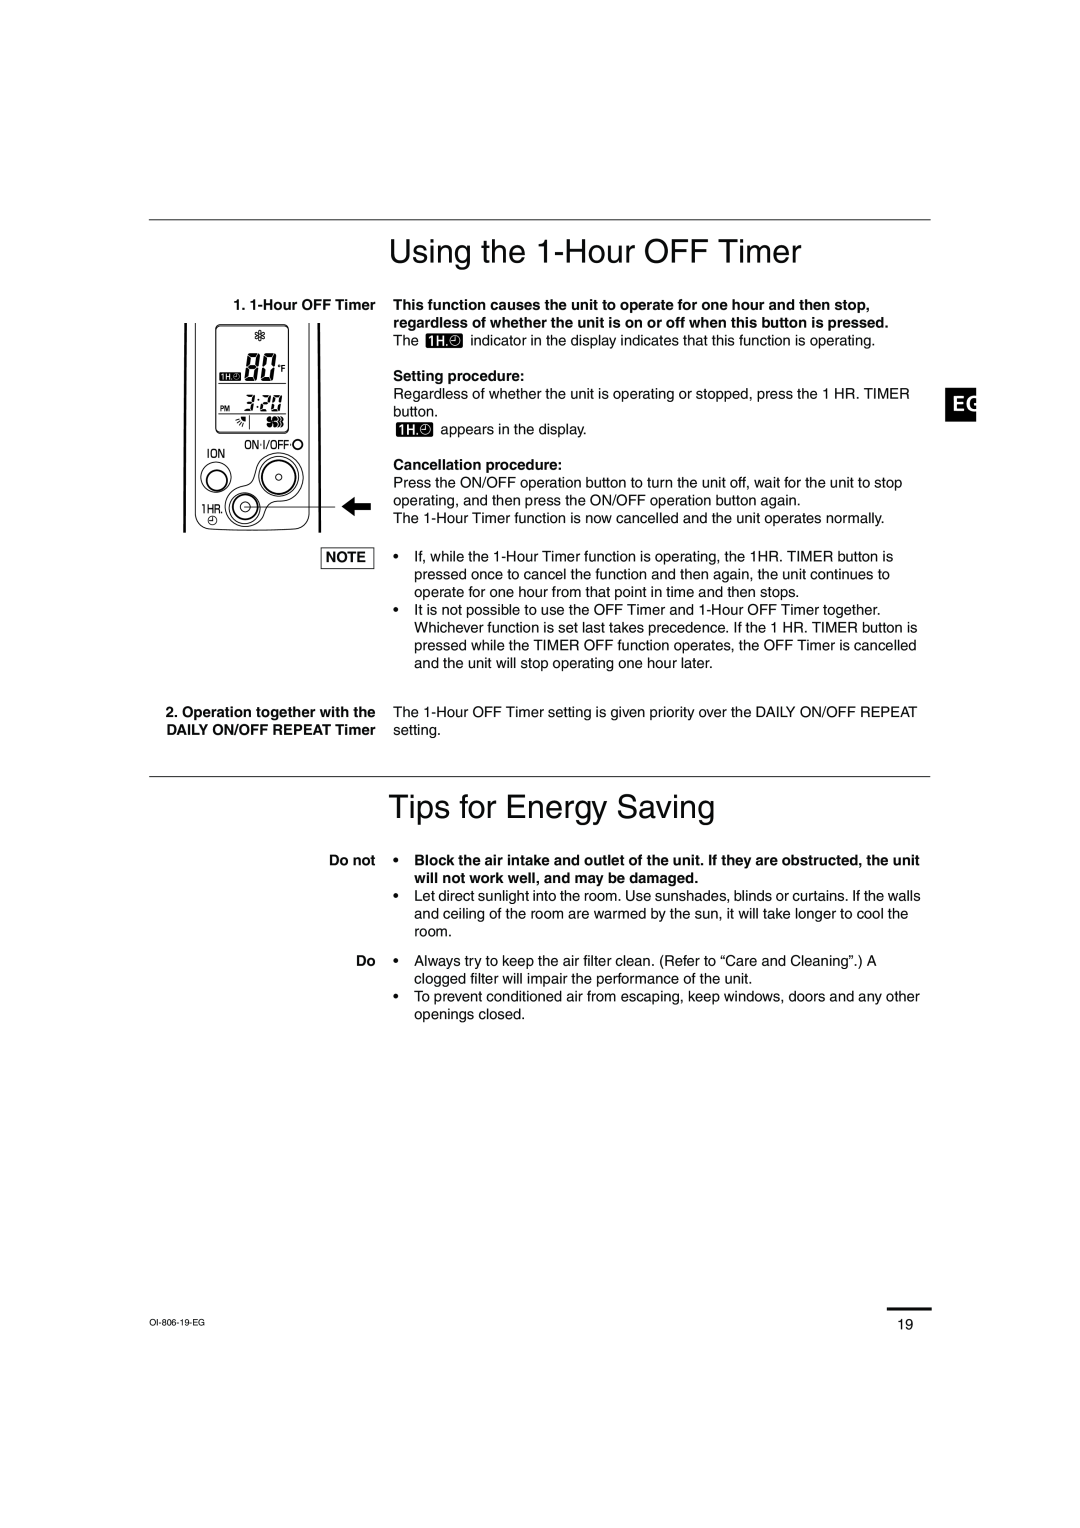 Sanyo KMS1272, KMS0972 instruction manual Using the 1-HourOFF Timer, Tips for Energy Saving 